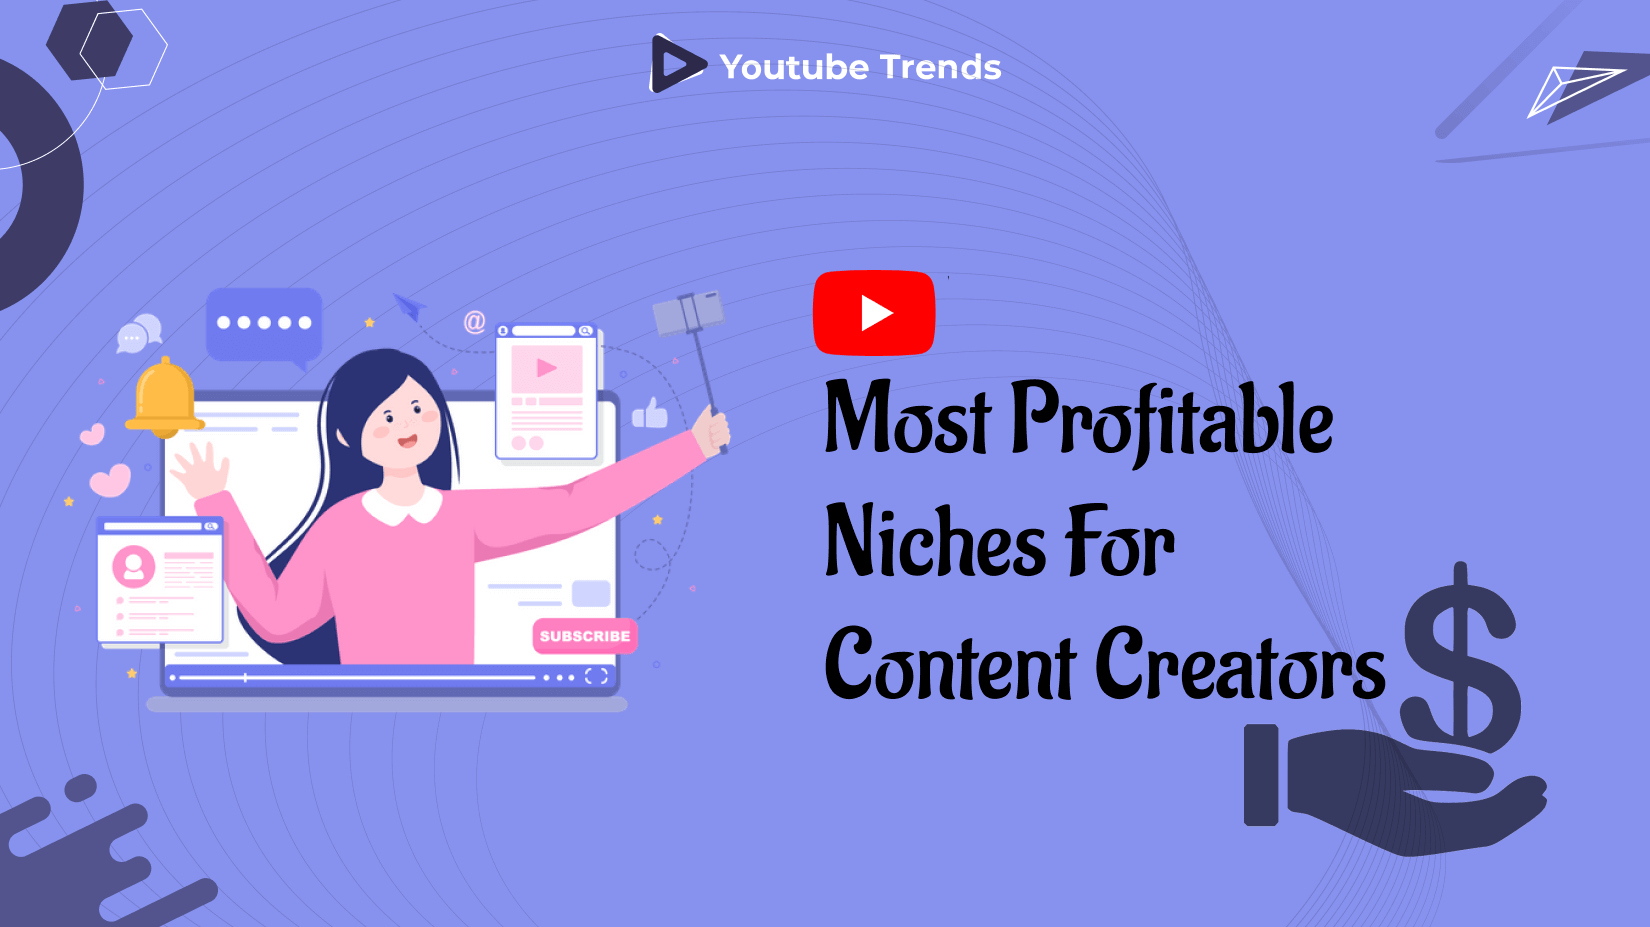 YouTube's Most Profitable Niches for Content Creators